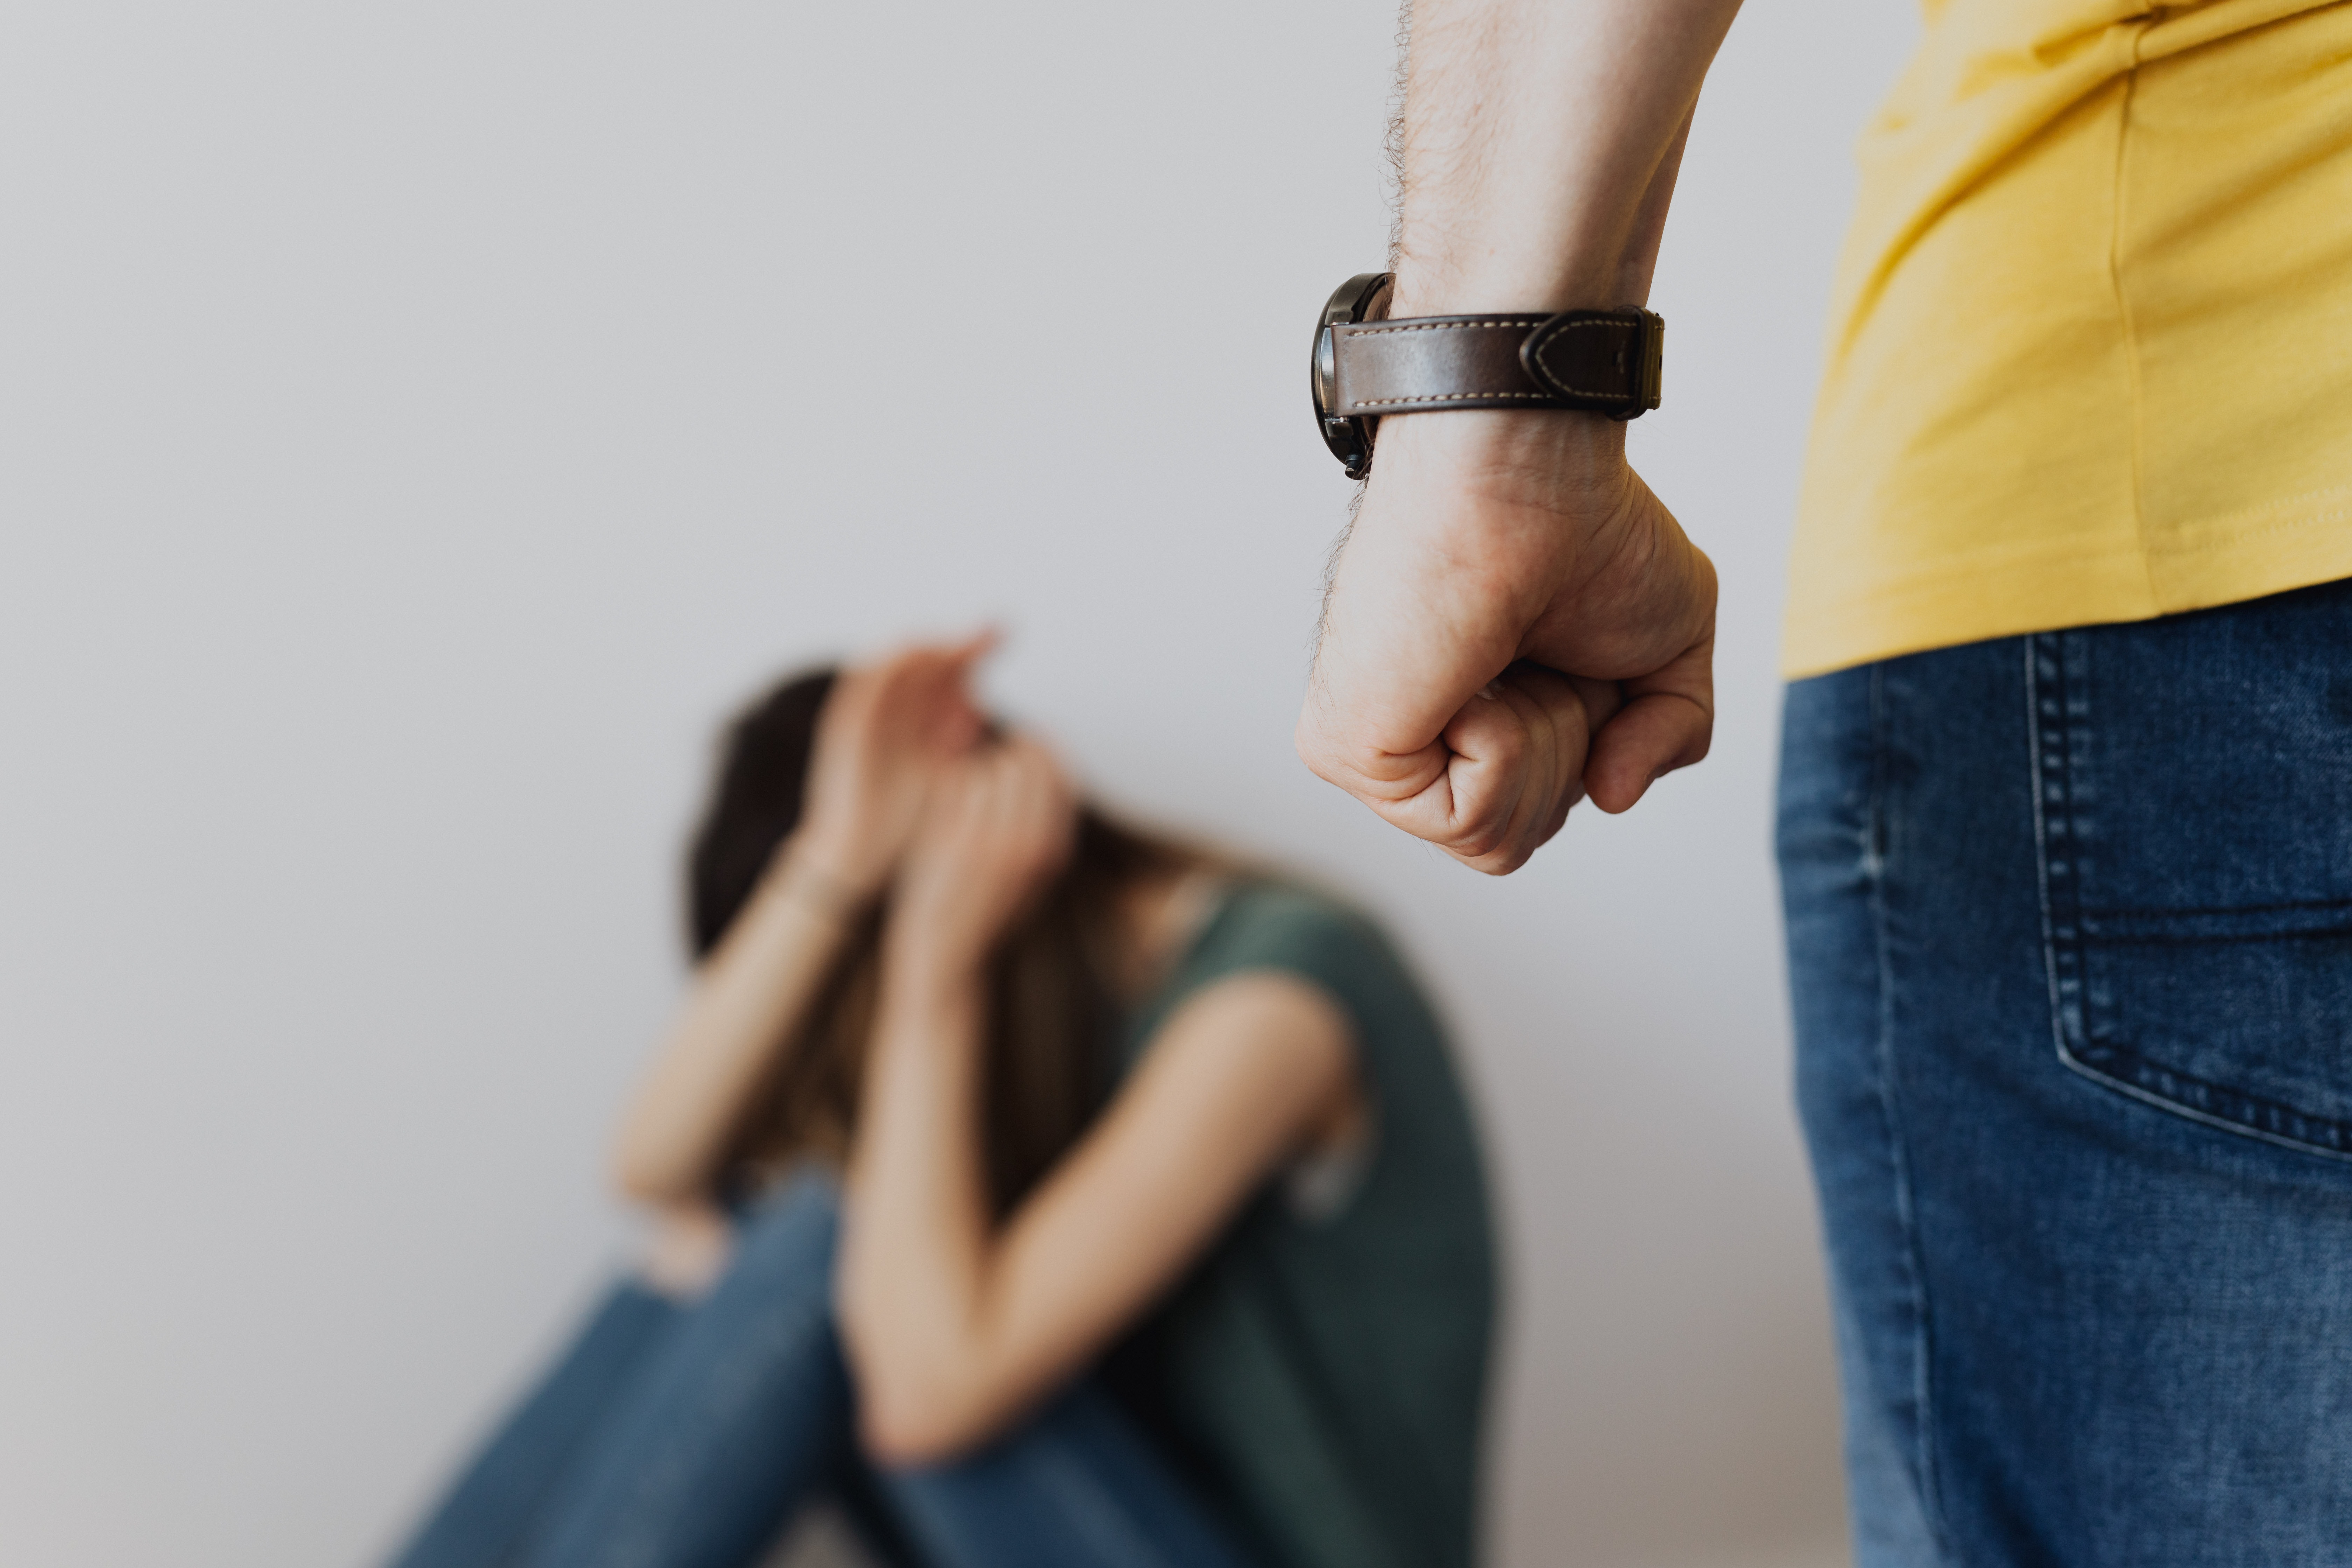 Domestic abuse can cause PTSD